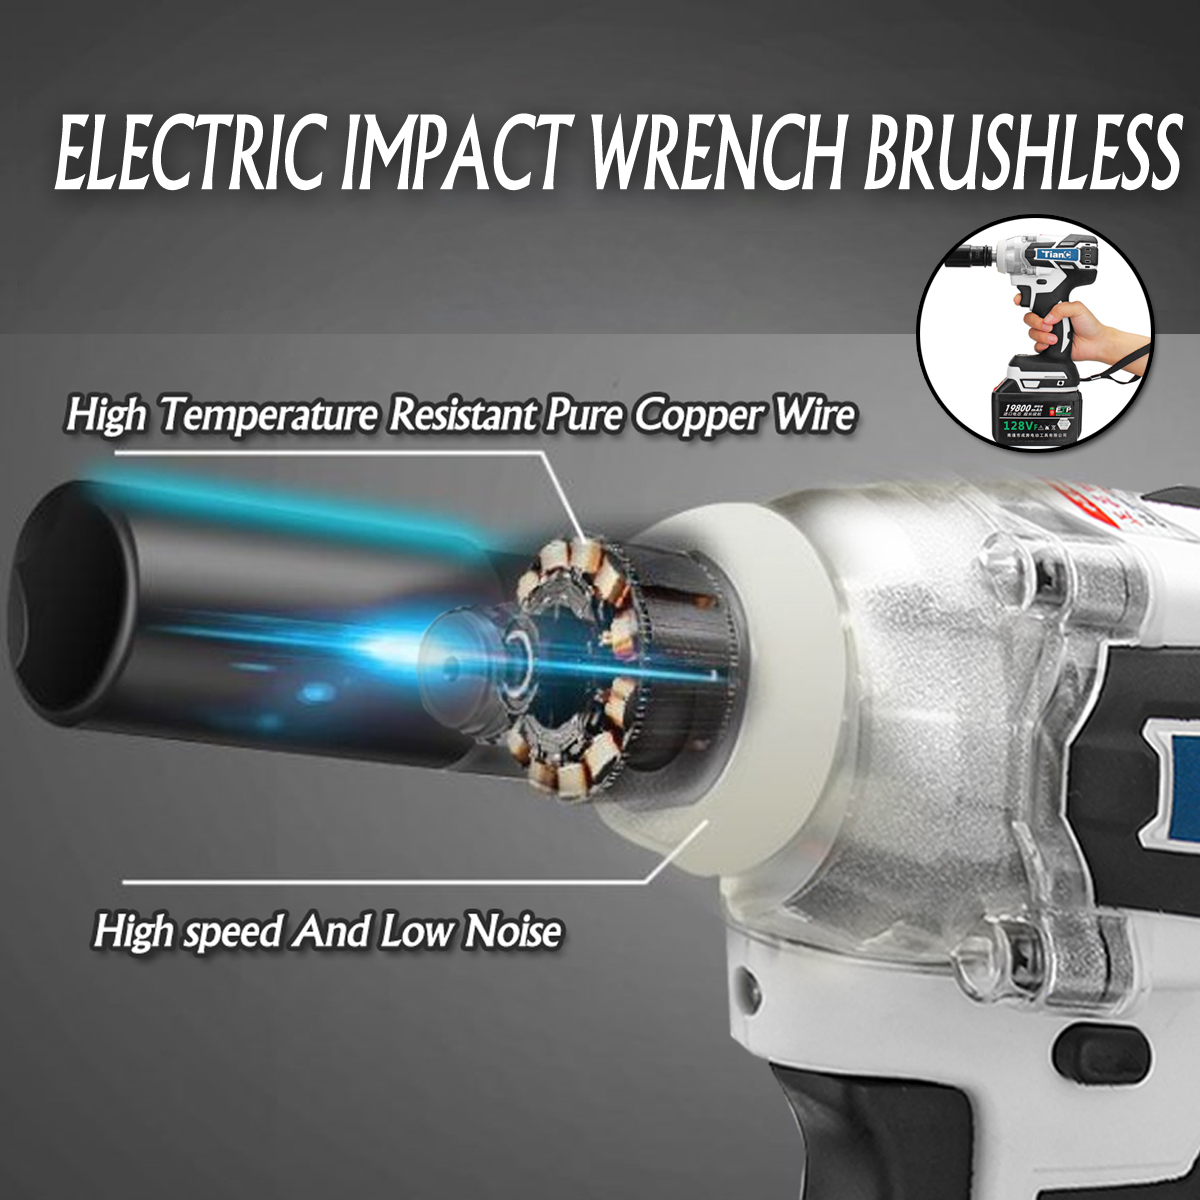 3 In 1 128VF 19800mAH Brushless Electric Wrench Power Drill Electric Screwdriver 240-520NM Adjustable Stepless Speed Regulation